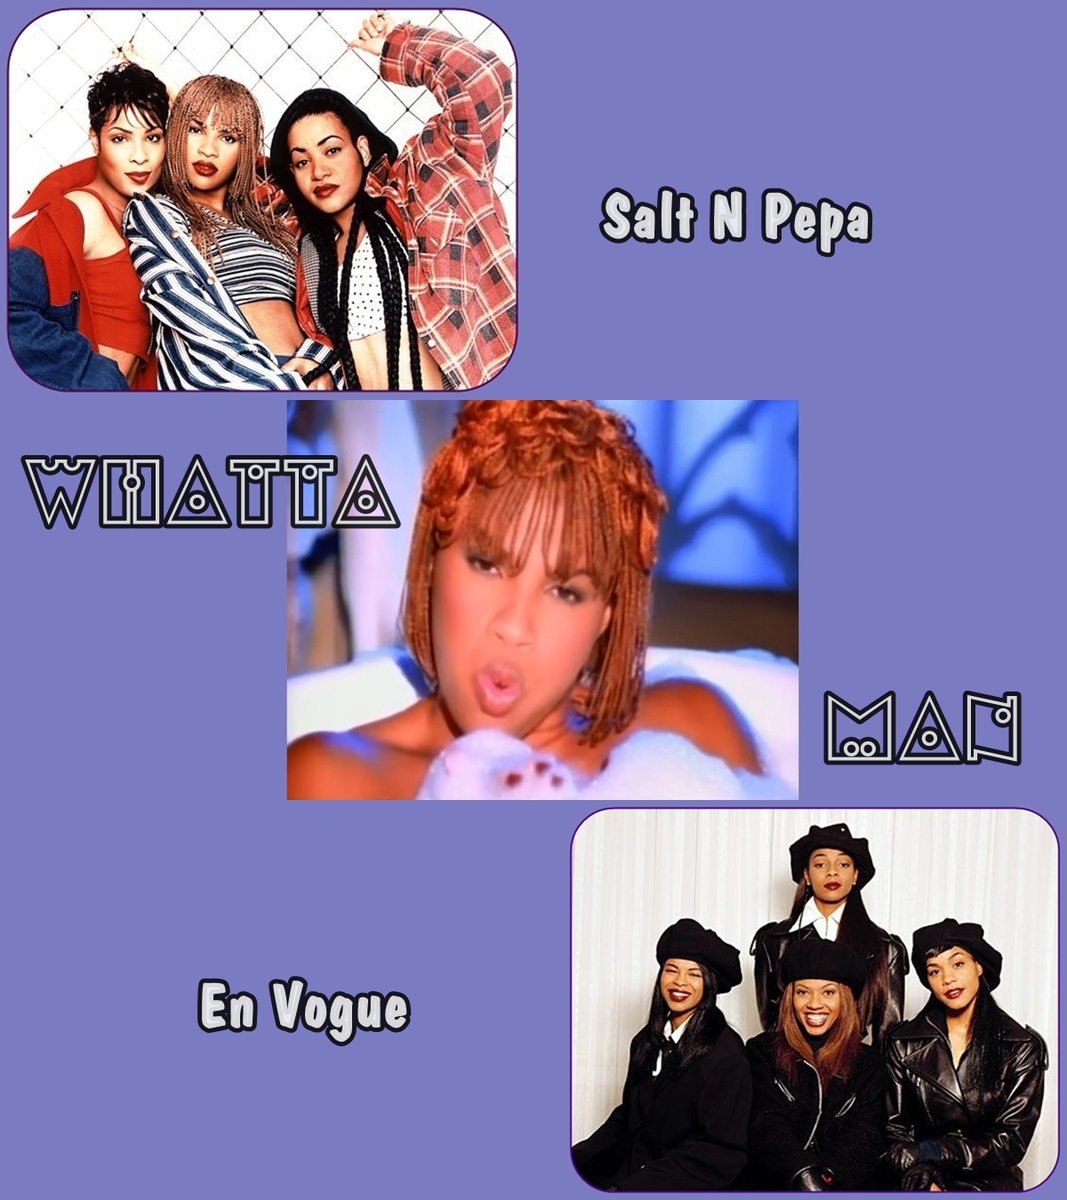 24M39 - May Day Special - 'Whatta Man' - This biggest 1993 hit of 'Salt N Pepa' & 'En Vogue' has a speciality - Its music gives the feeling of 'floating on the water'!
youtube.com/watch?v=5vgV_d…
@DaRealSaltNPepa @SaltNPepaSQUAD #SaltnPepa @EnVogueMusic #whattaMan @mmkeeravaani